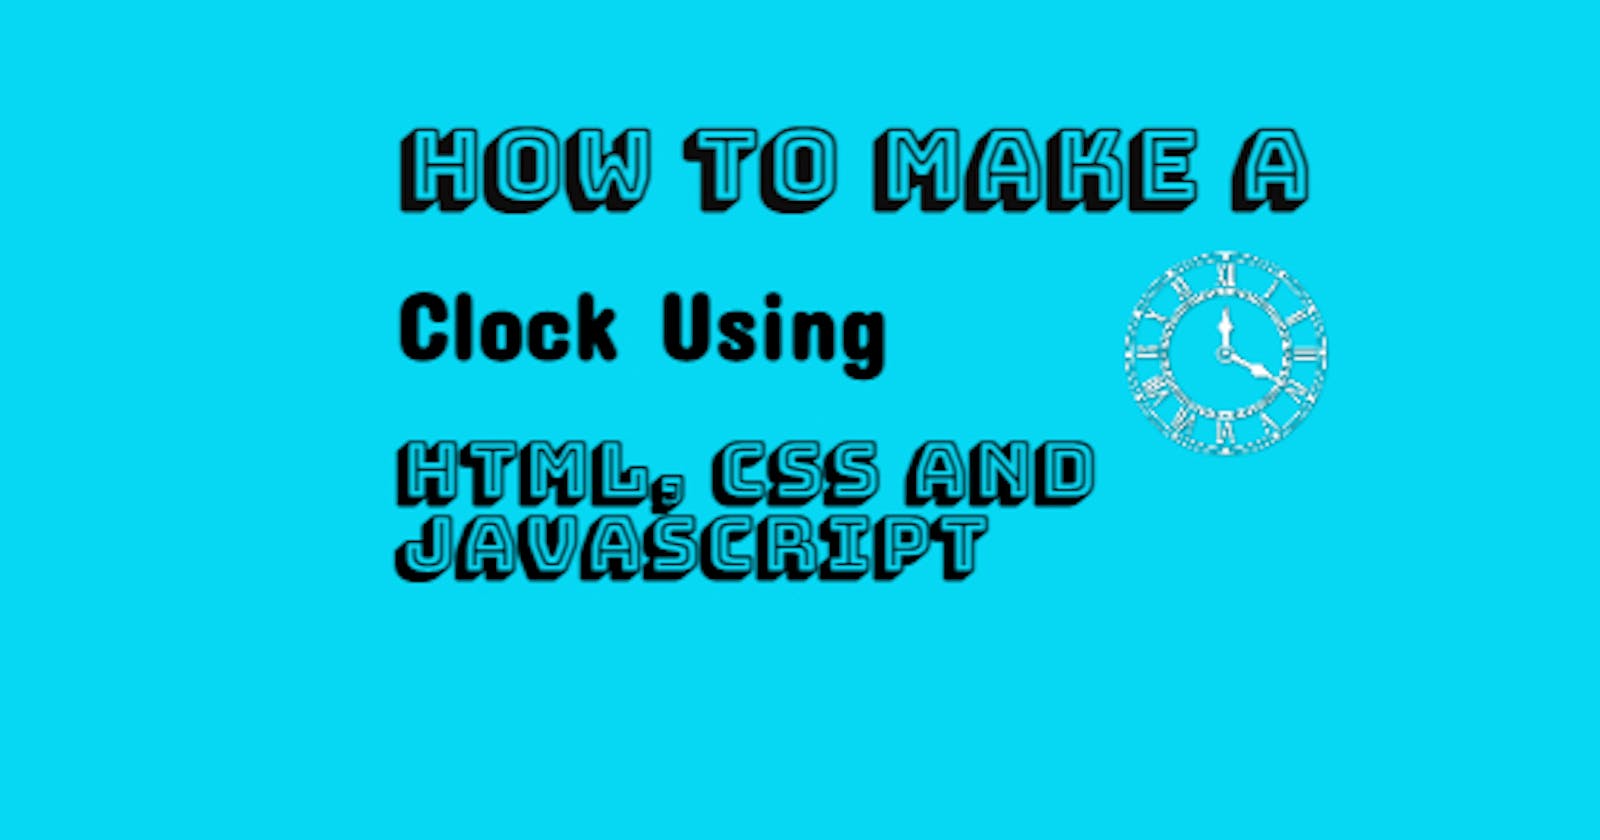 Make A Simple Clock Using HTML, CSS And JavaScript